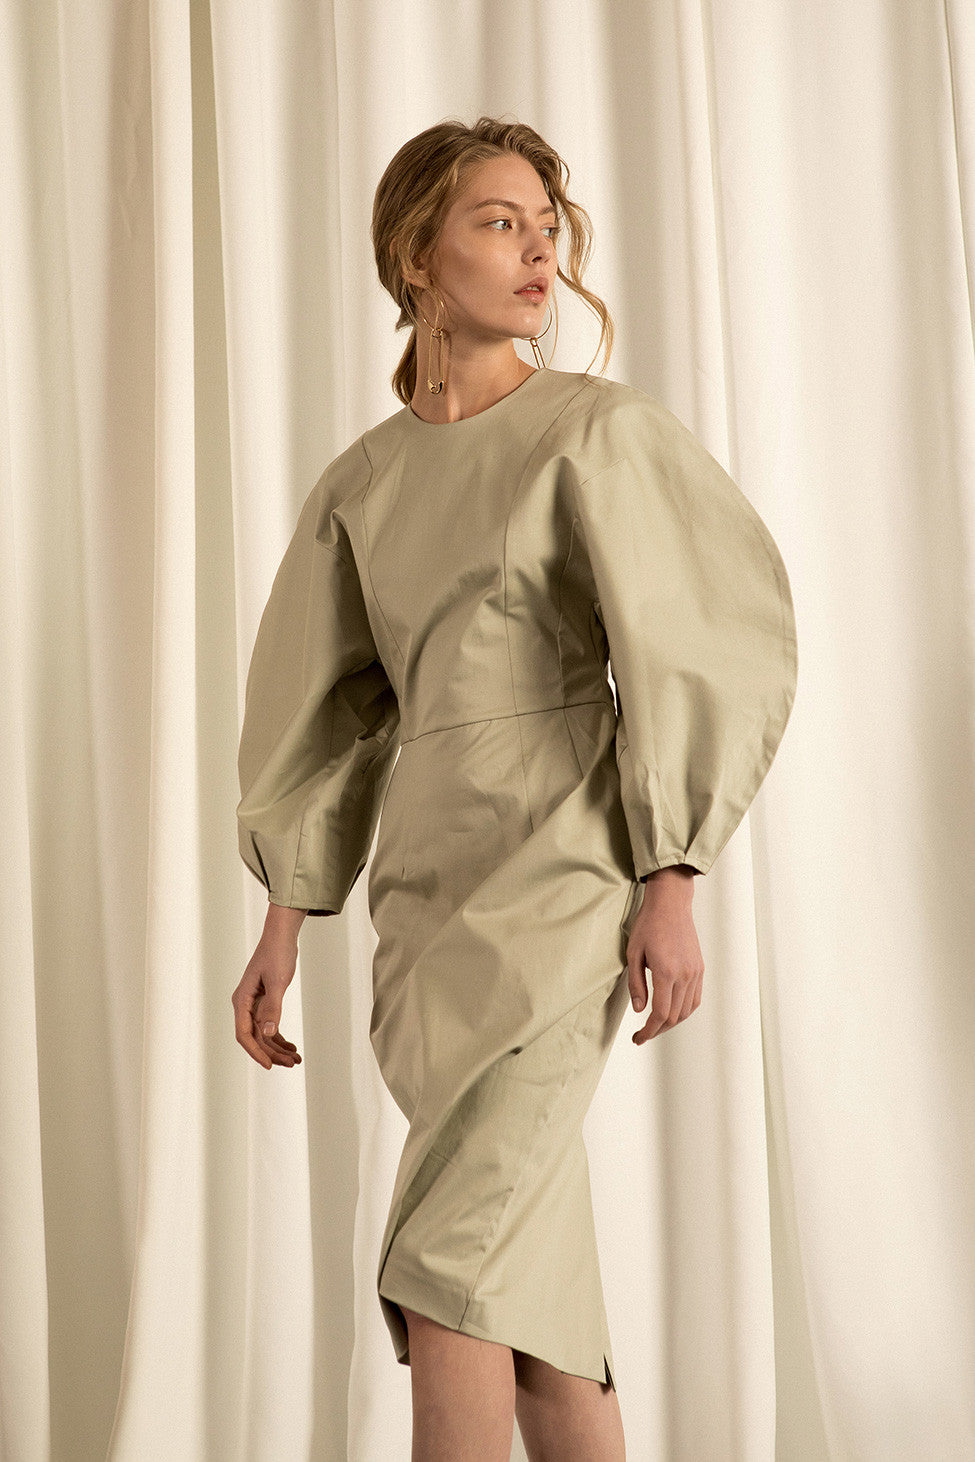 The Leyla dress in Olive, featuring round neckline, long puff sleeves with raglan detail at cuff, concealed zip fastening at the back. Fitted bodice. 